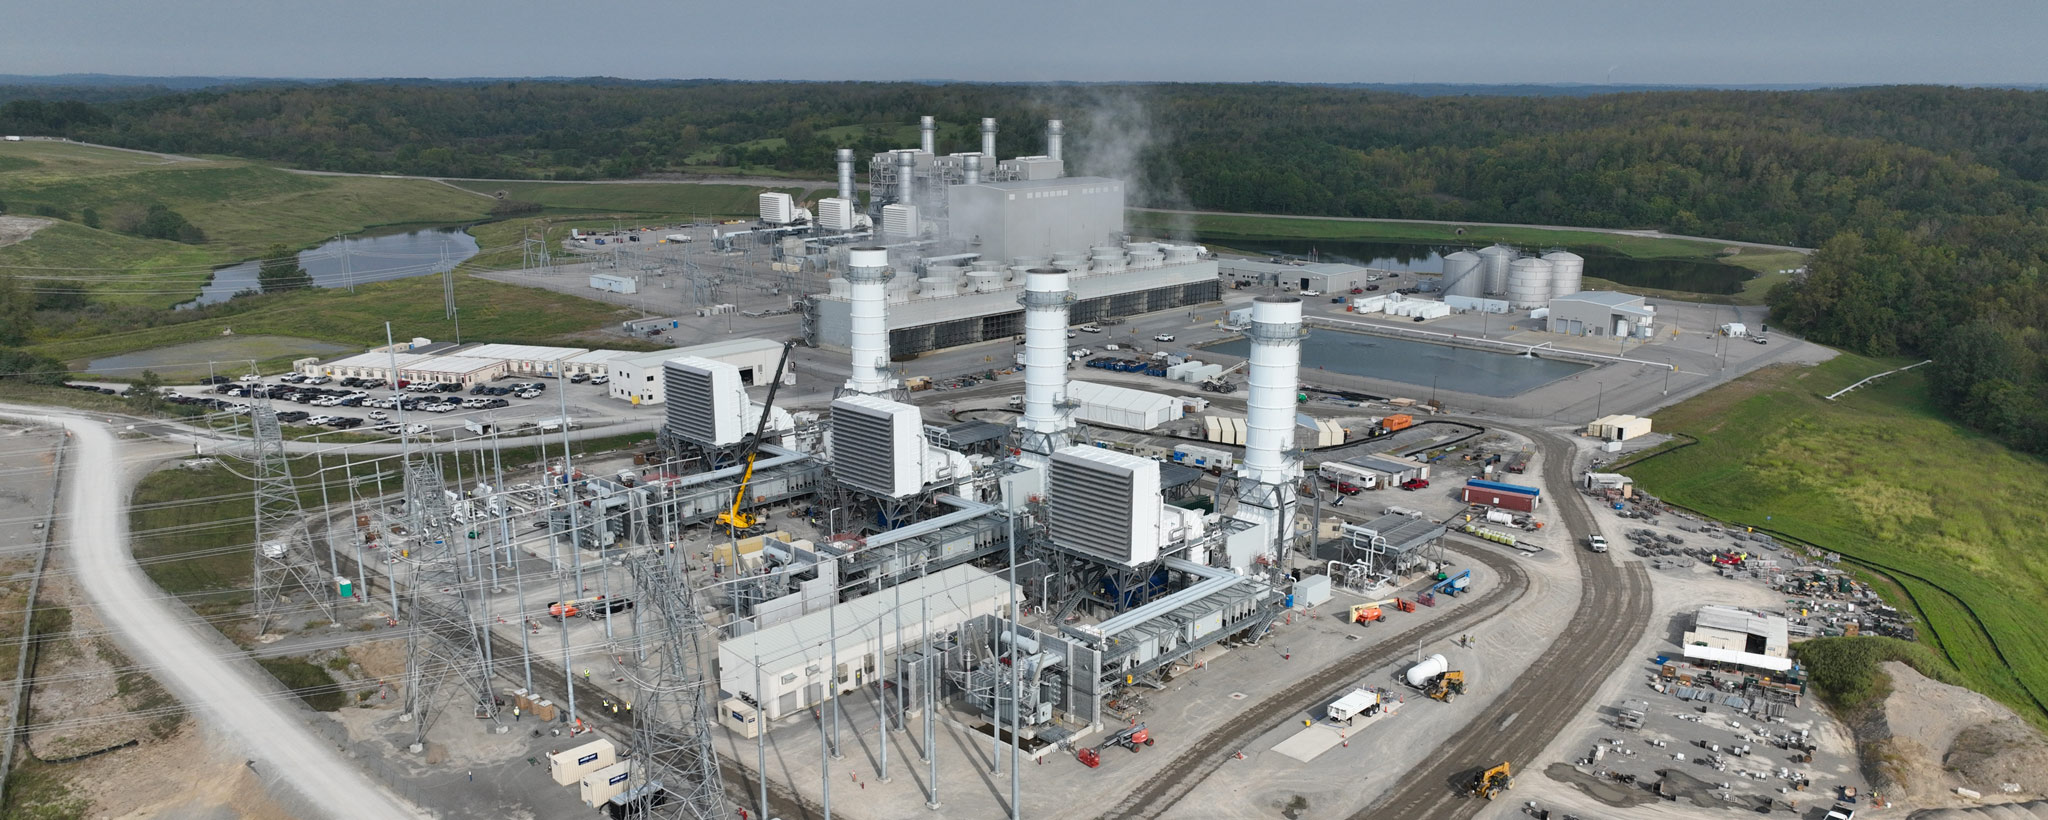 An aerial view of Paradise Combined Cycle Plant in Drakesboro, Kentucky.